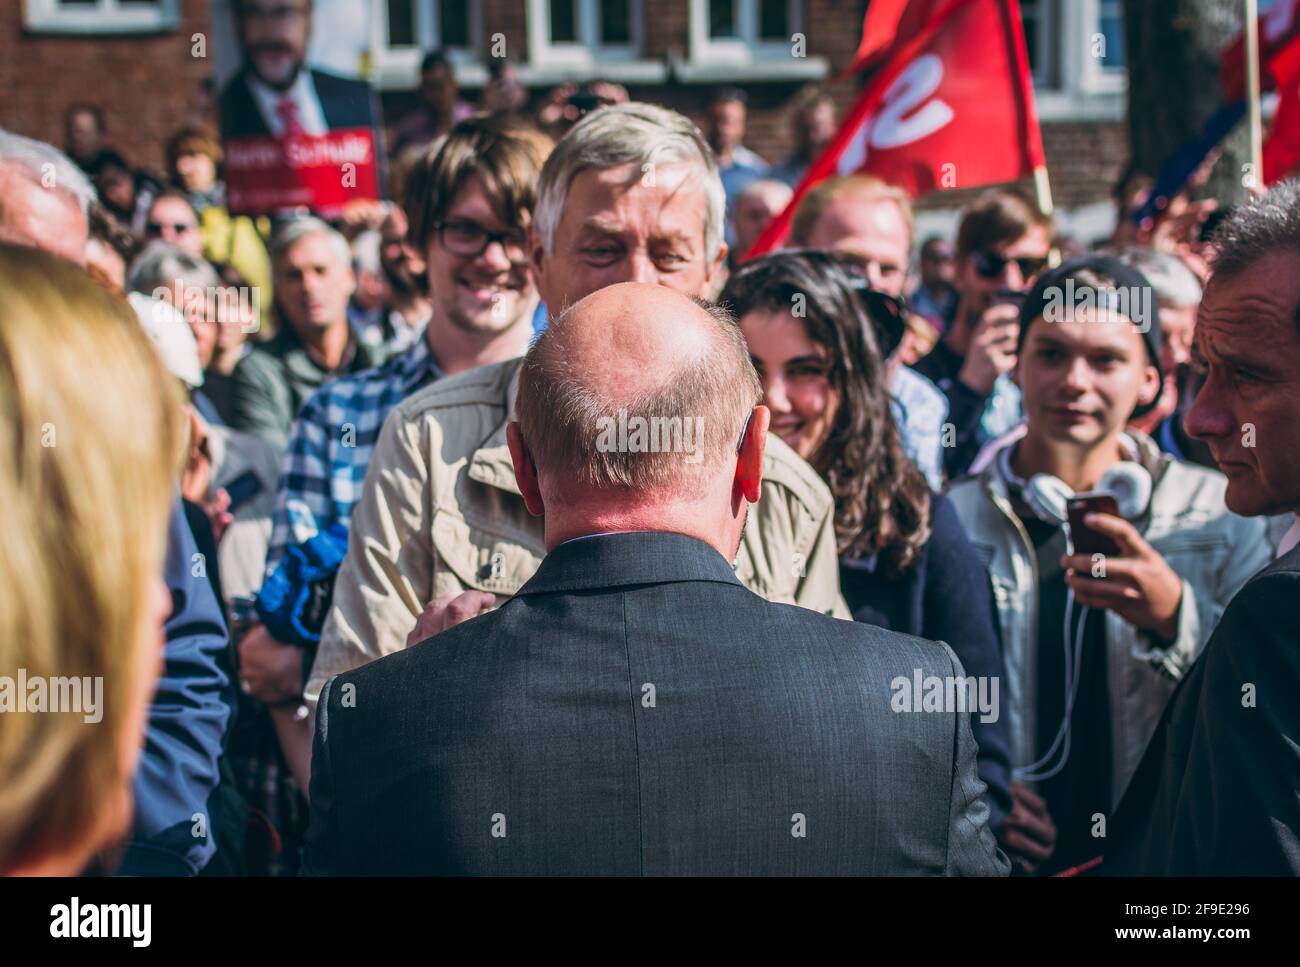 Aachen, Germany - 23 September 2017: Martin Schulz, German politician and social democrats candidate for the chancellorship meets citizens during elec Stock Photo